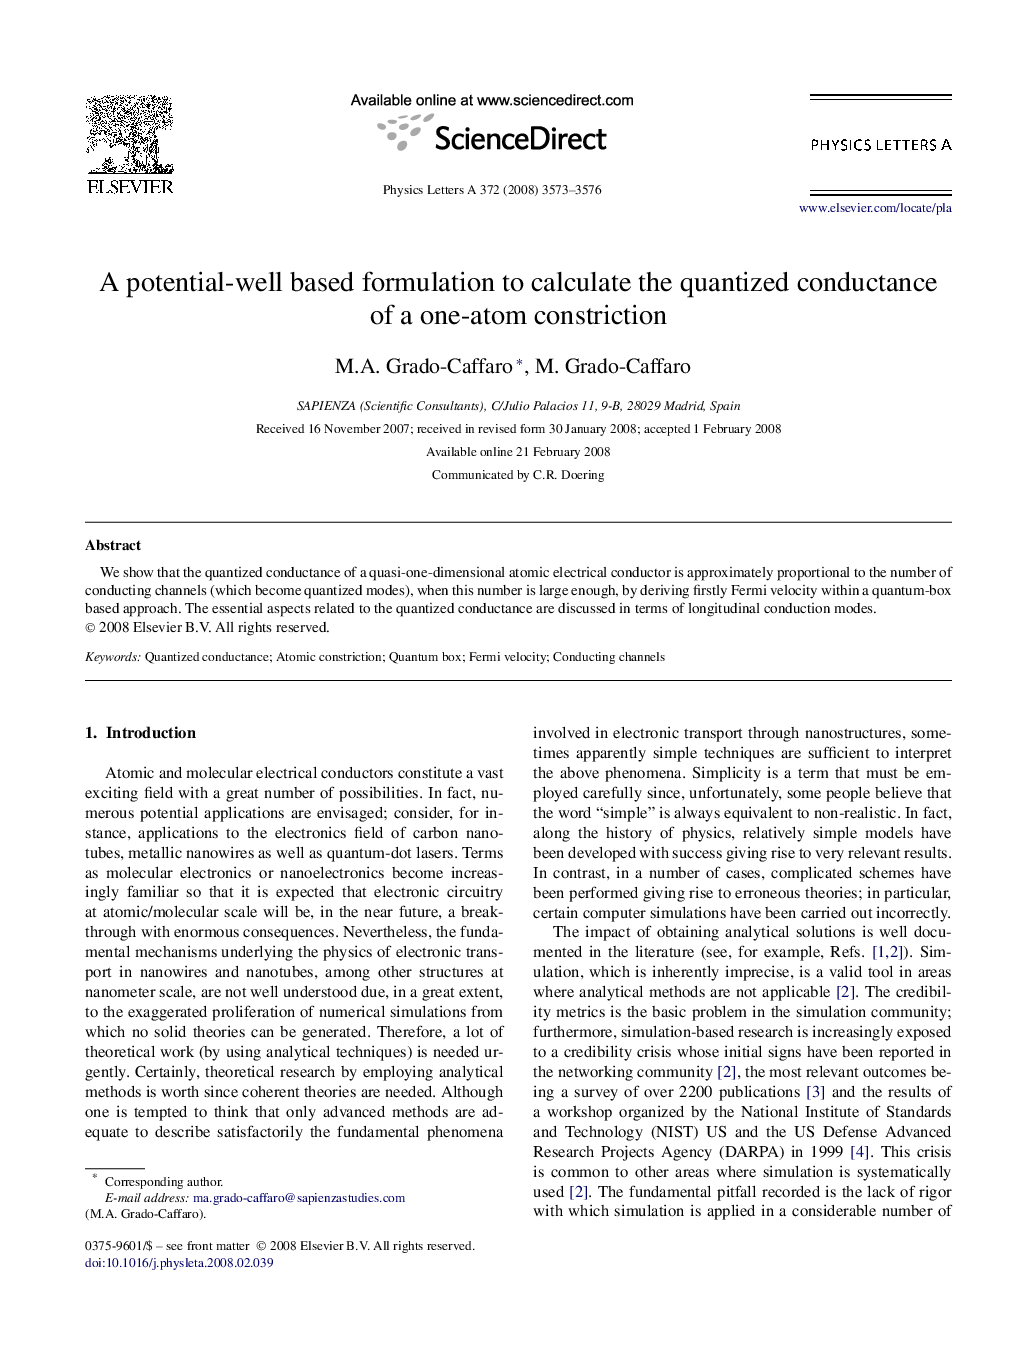 A potential-well based formulation to calculate the quantized conductance of a one-atom constriction